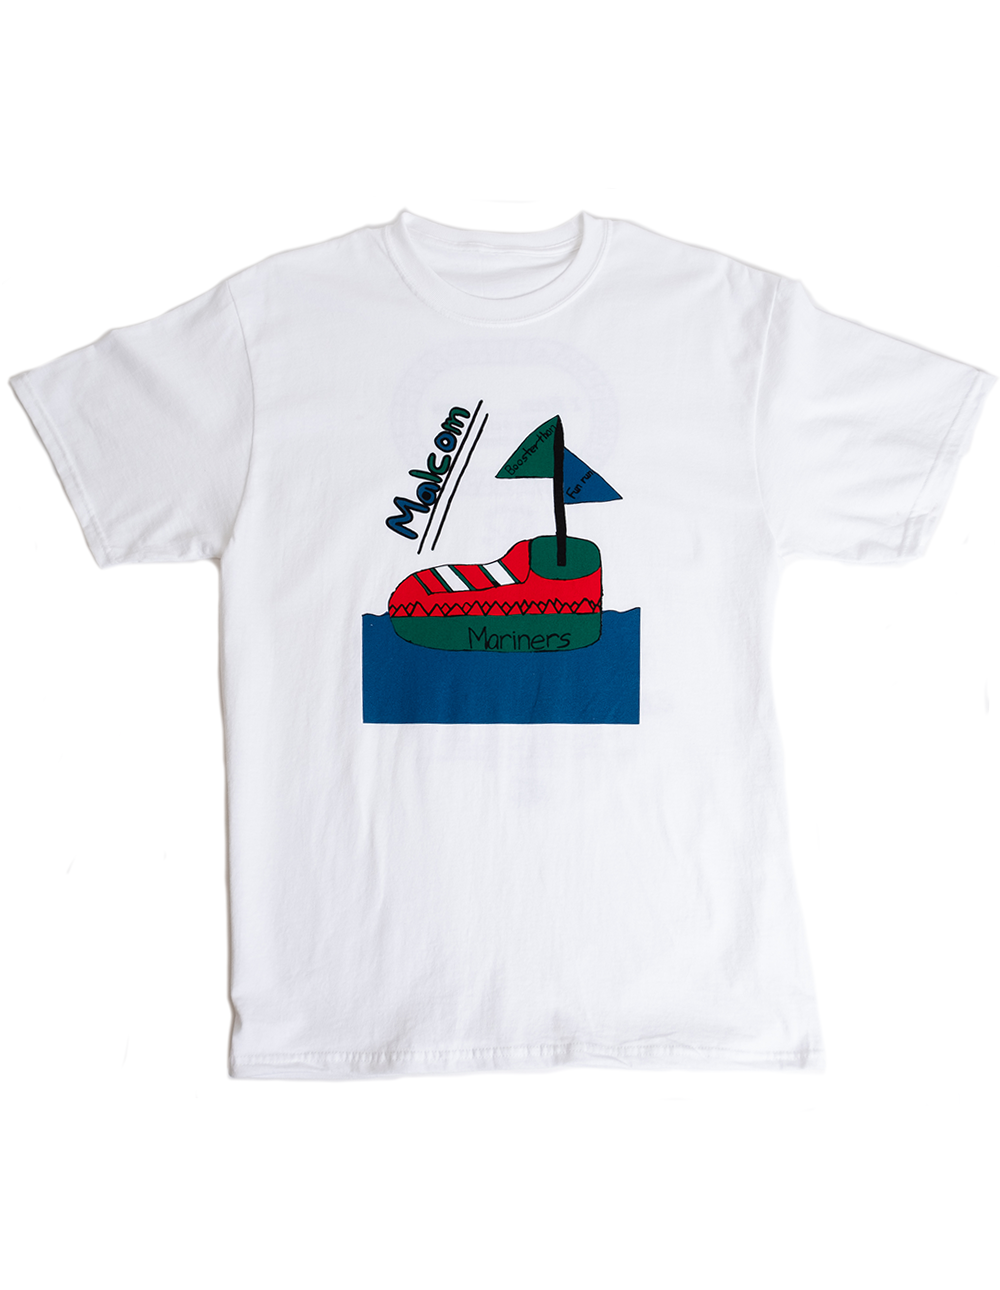 art and ink mariners printed school t-shirt